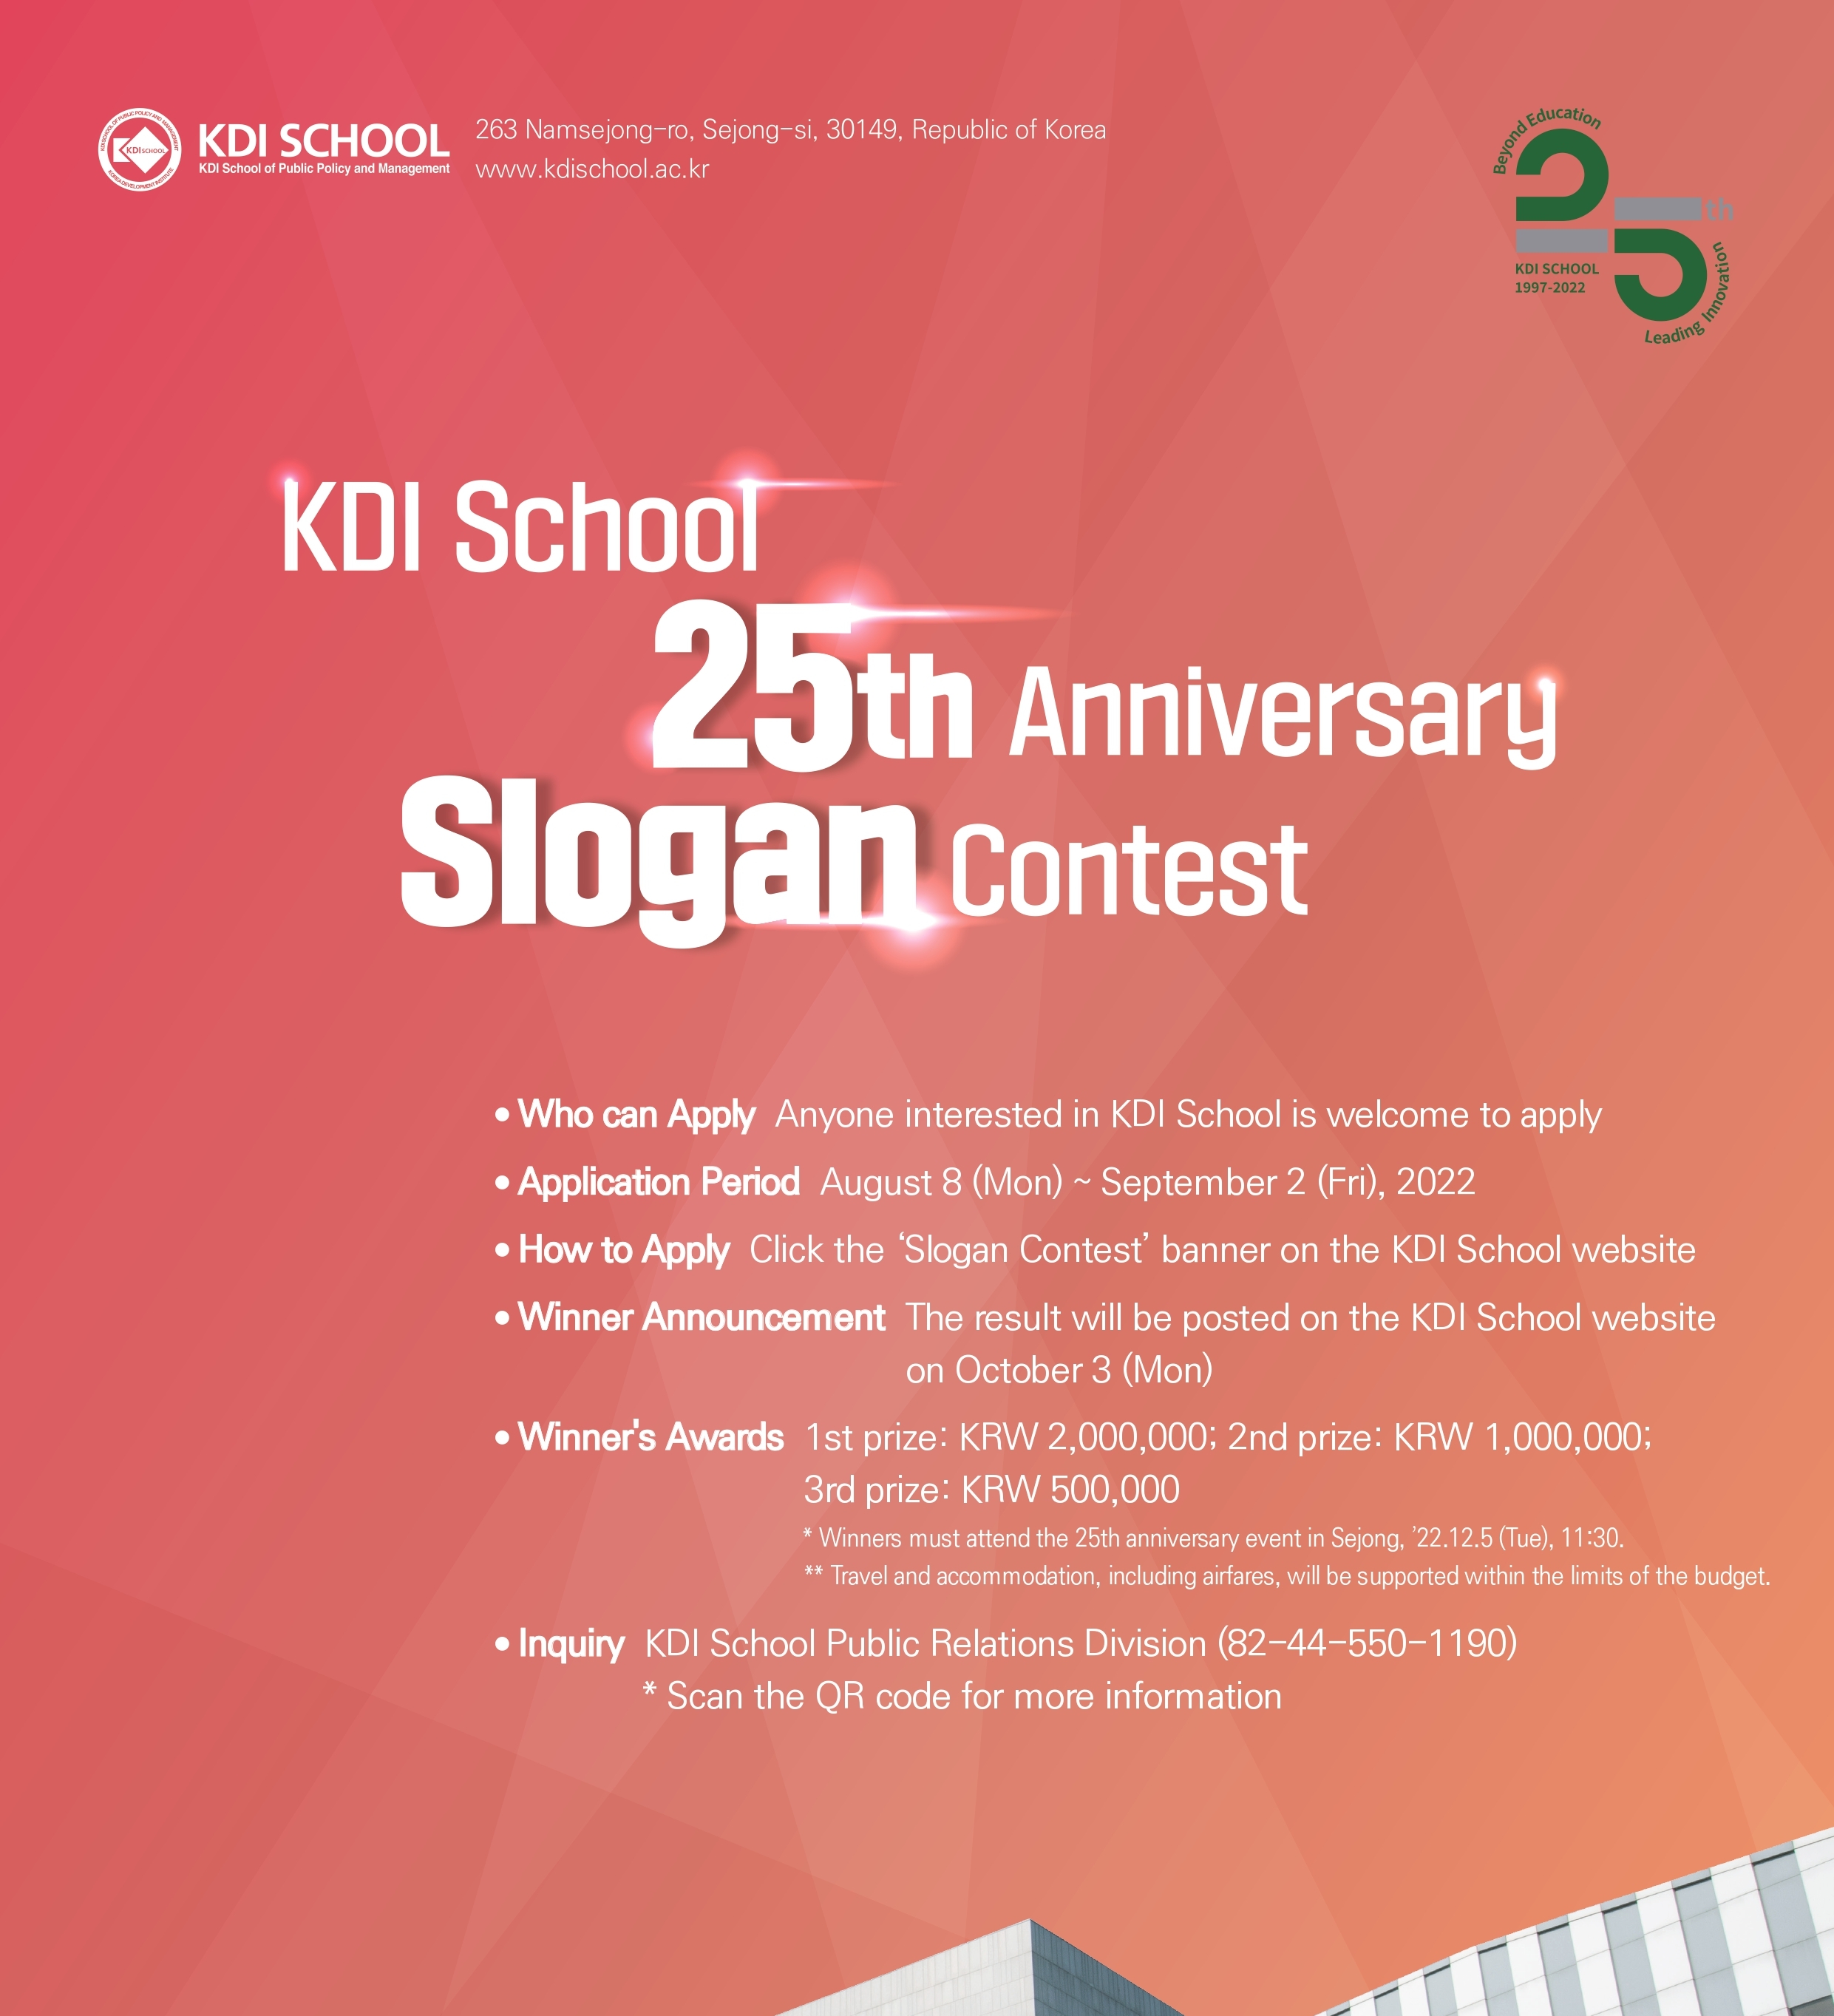 KDI School 25th Anniversary Slogan Contest (available to apply)